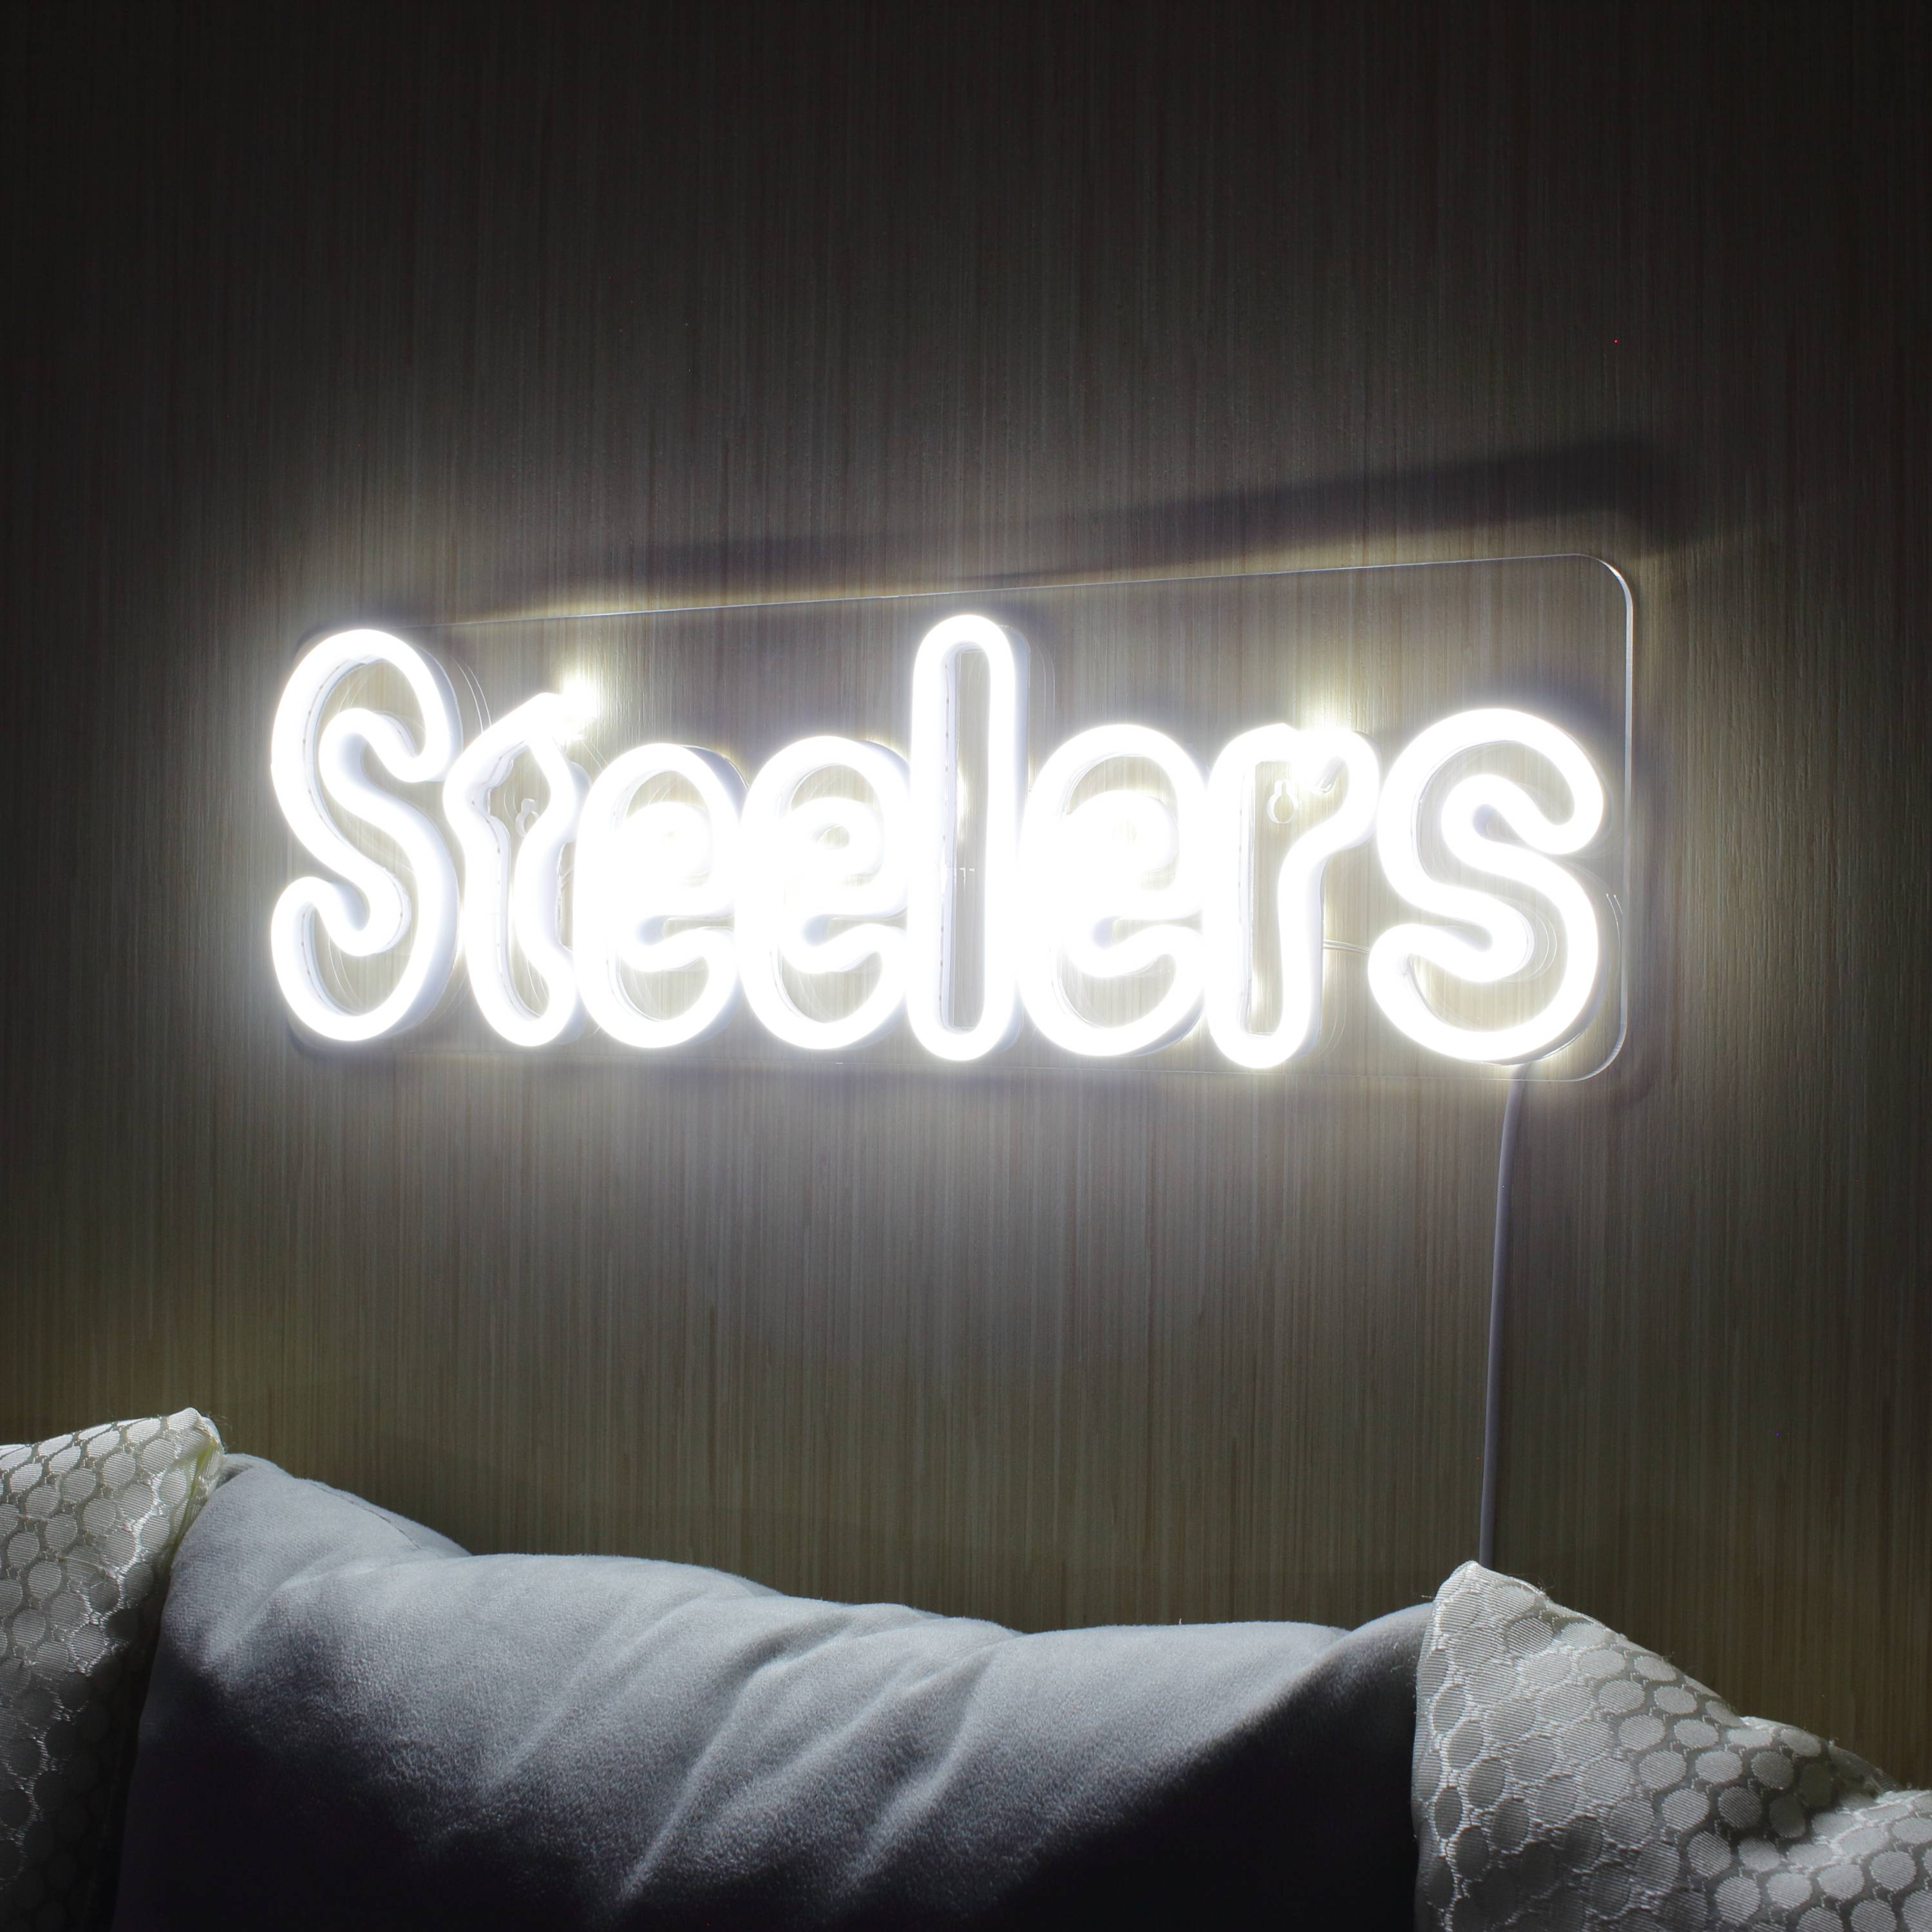 NFL STEELERS LED Neon Sign